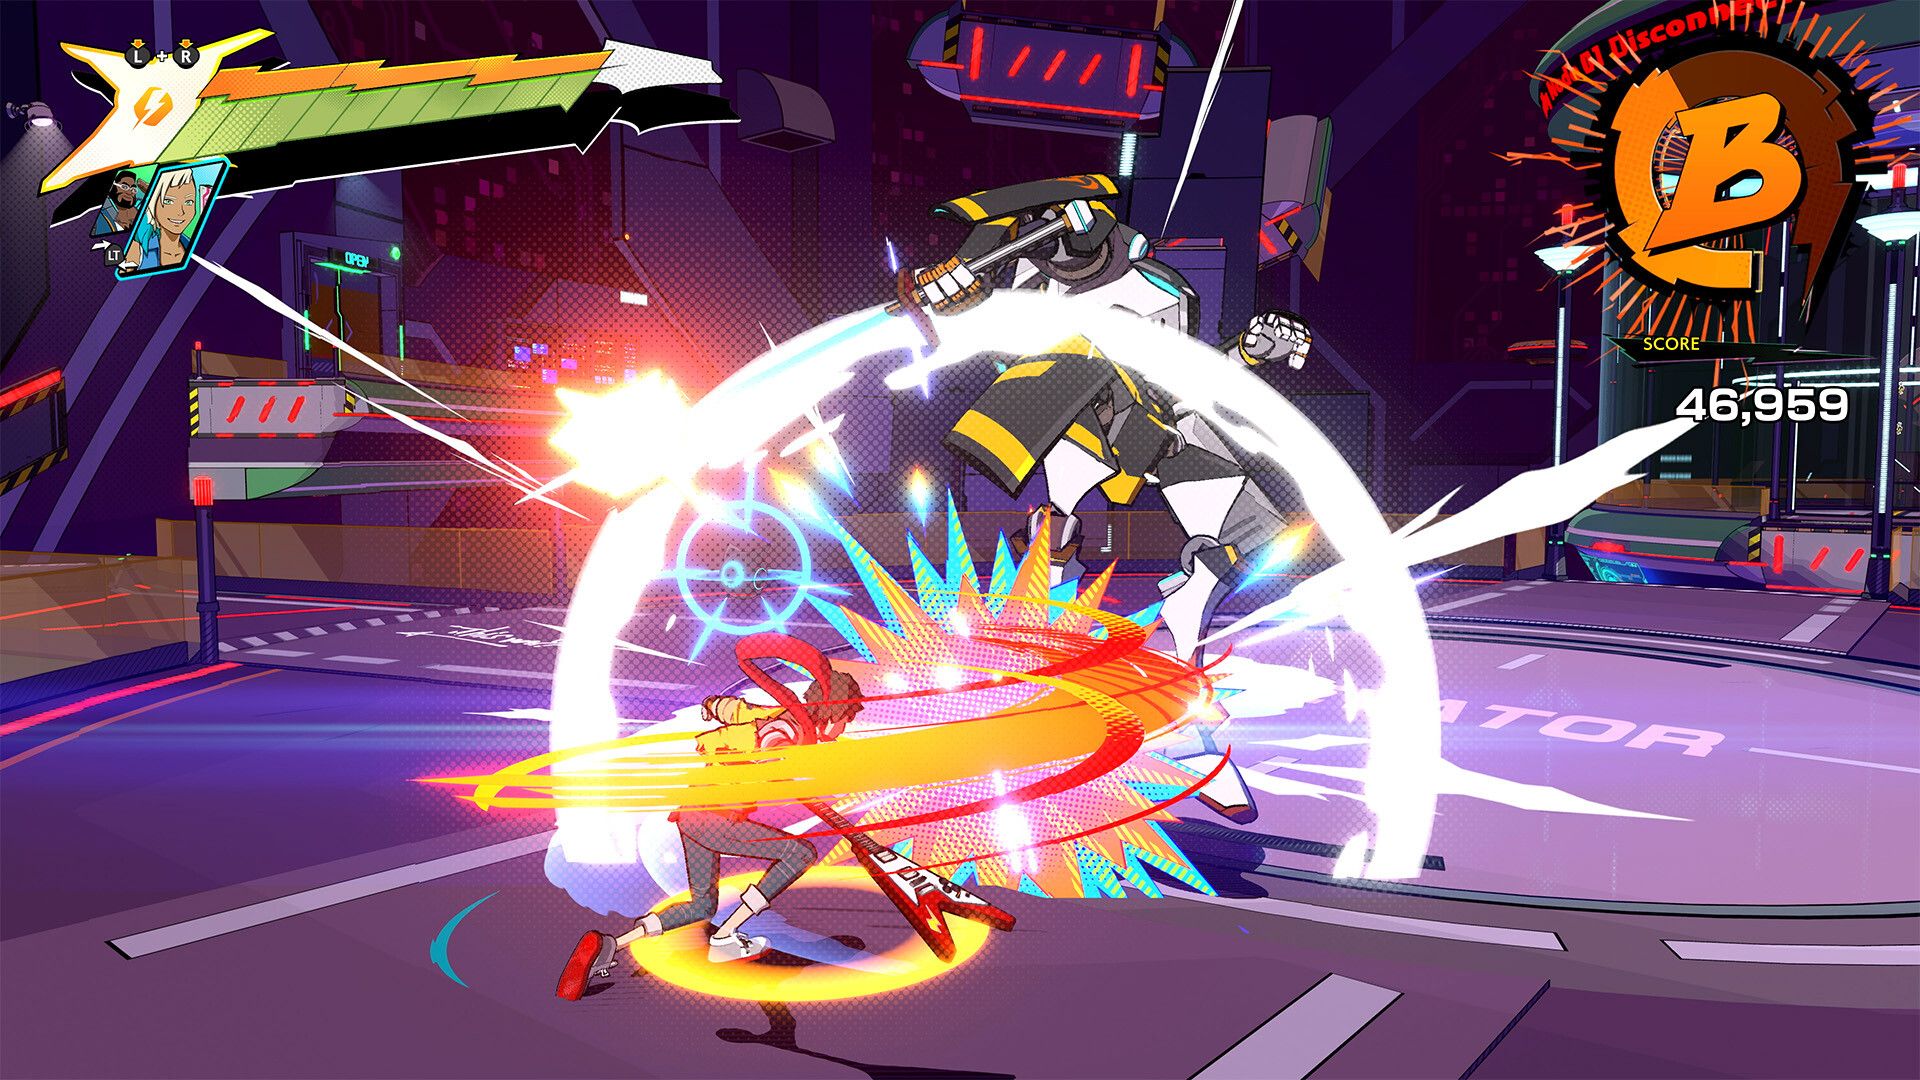 Screenshot of the game. Chai attacks a robotic enemy in a flurry of color and light.